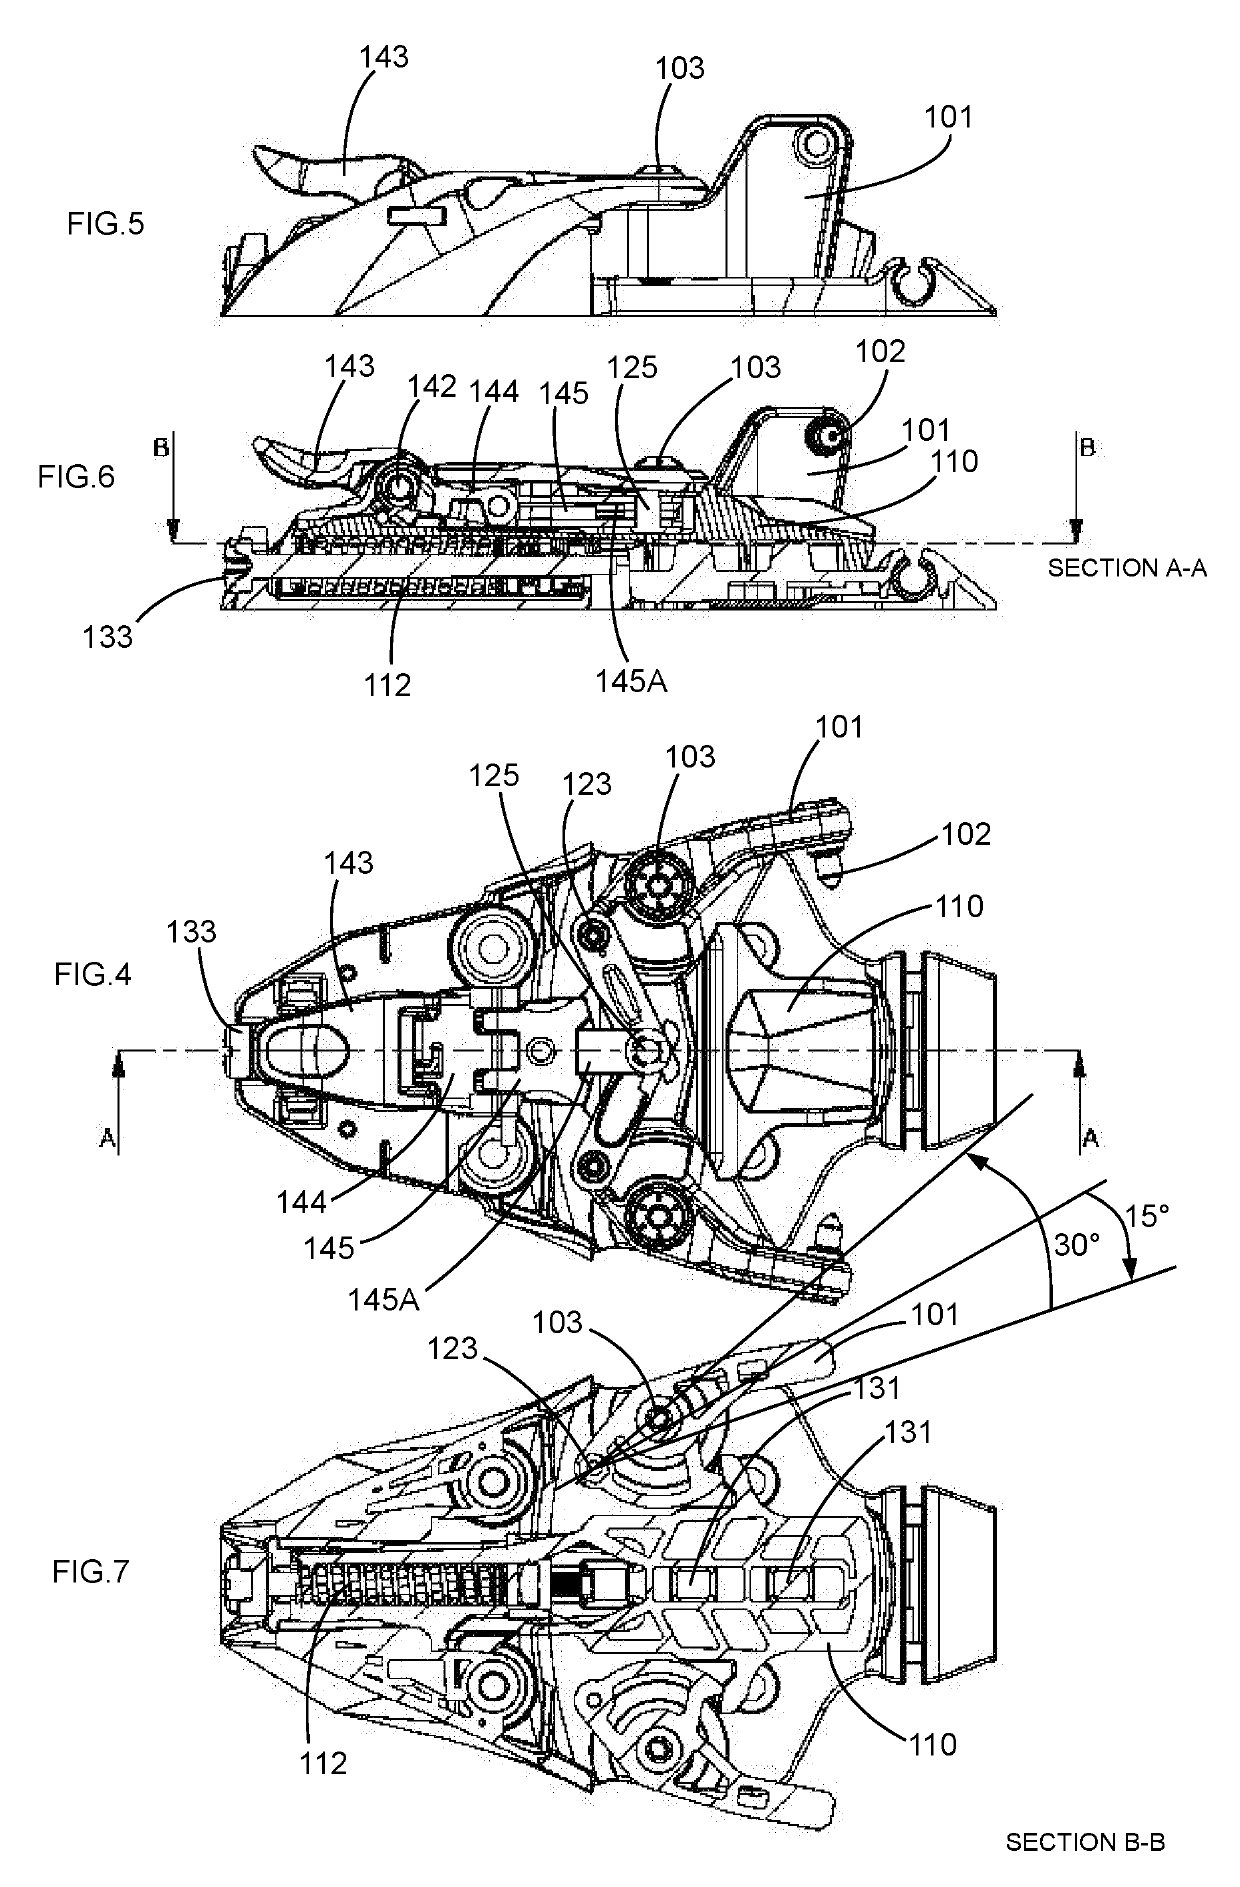 Stop for shoe binding device